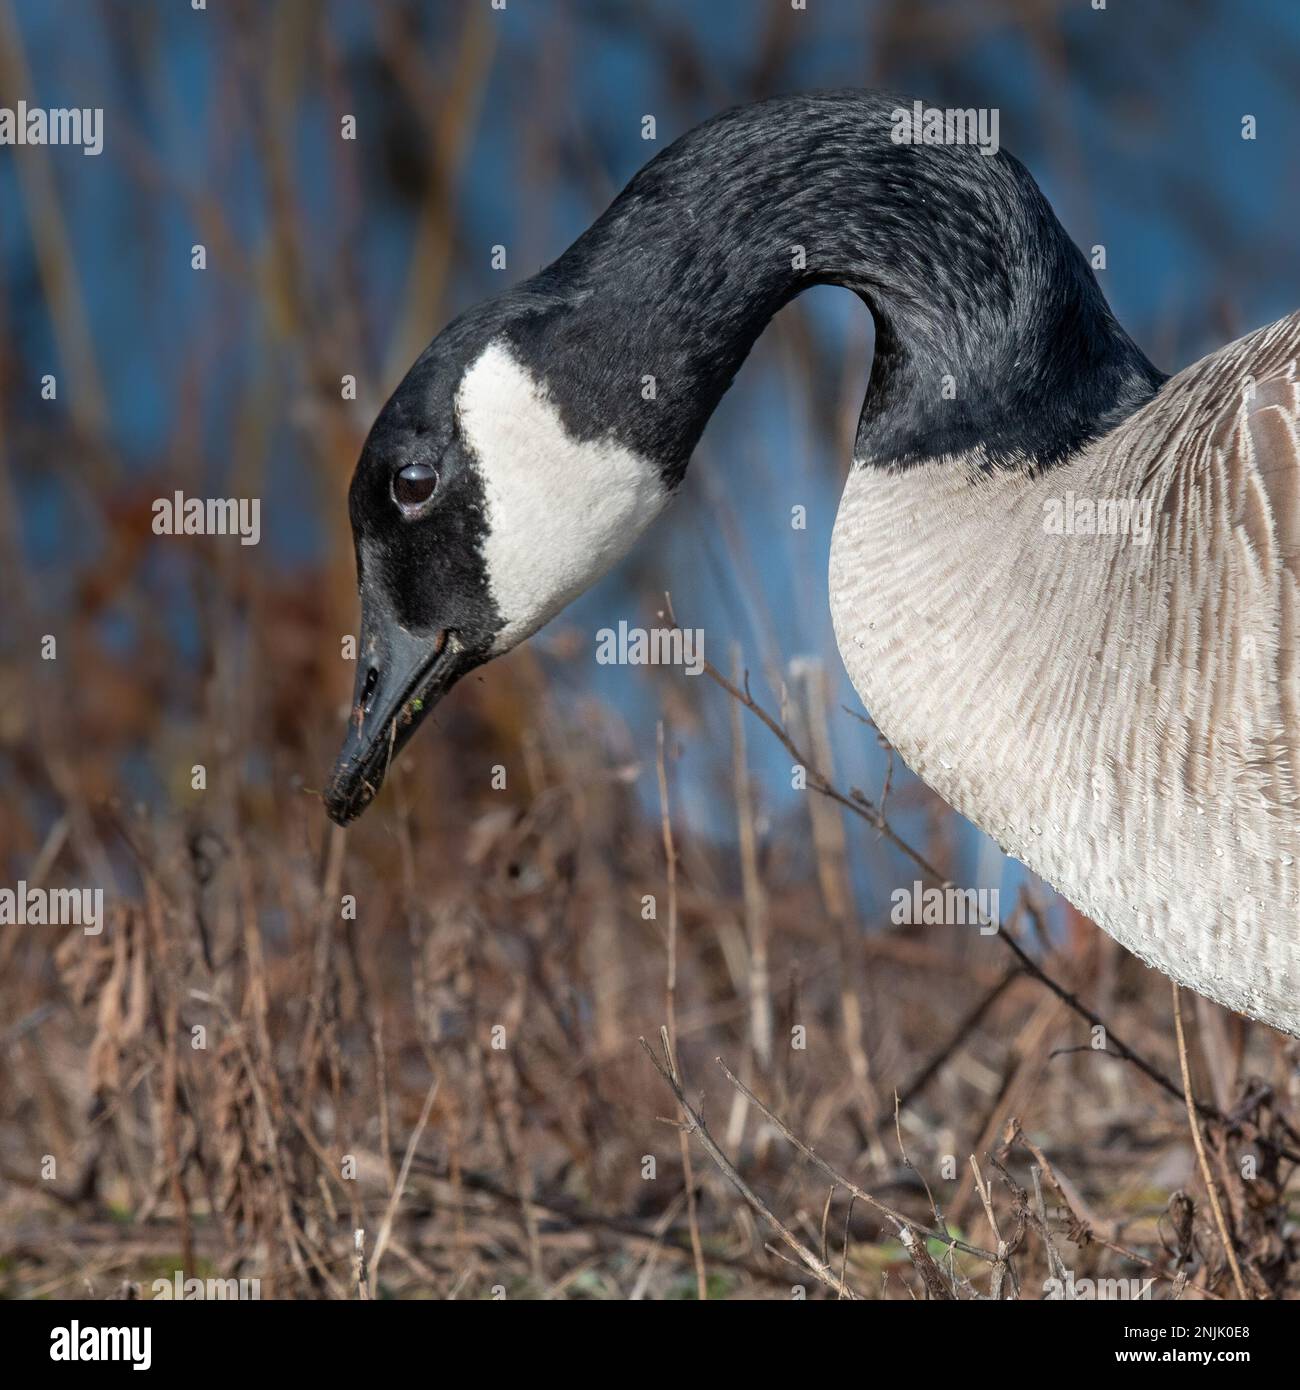 Canada goose Middle Creek Reservoir migration - Canadian geese Branta canadensis Stock Photo